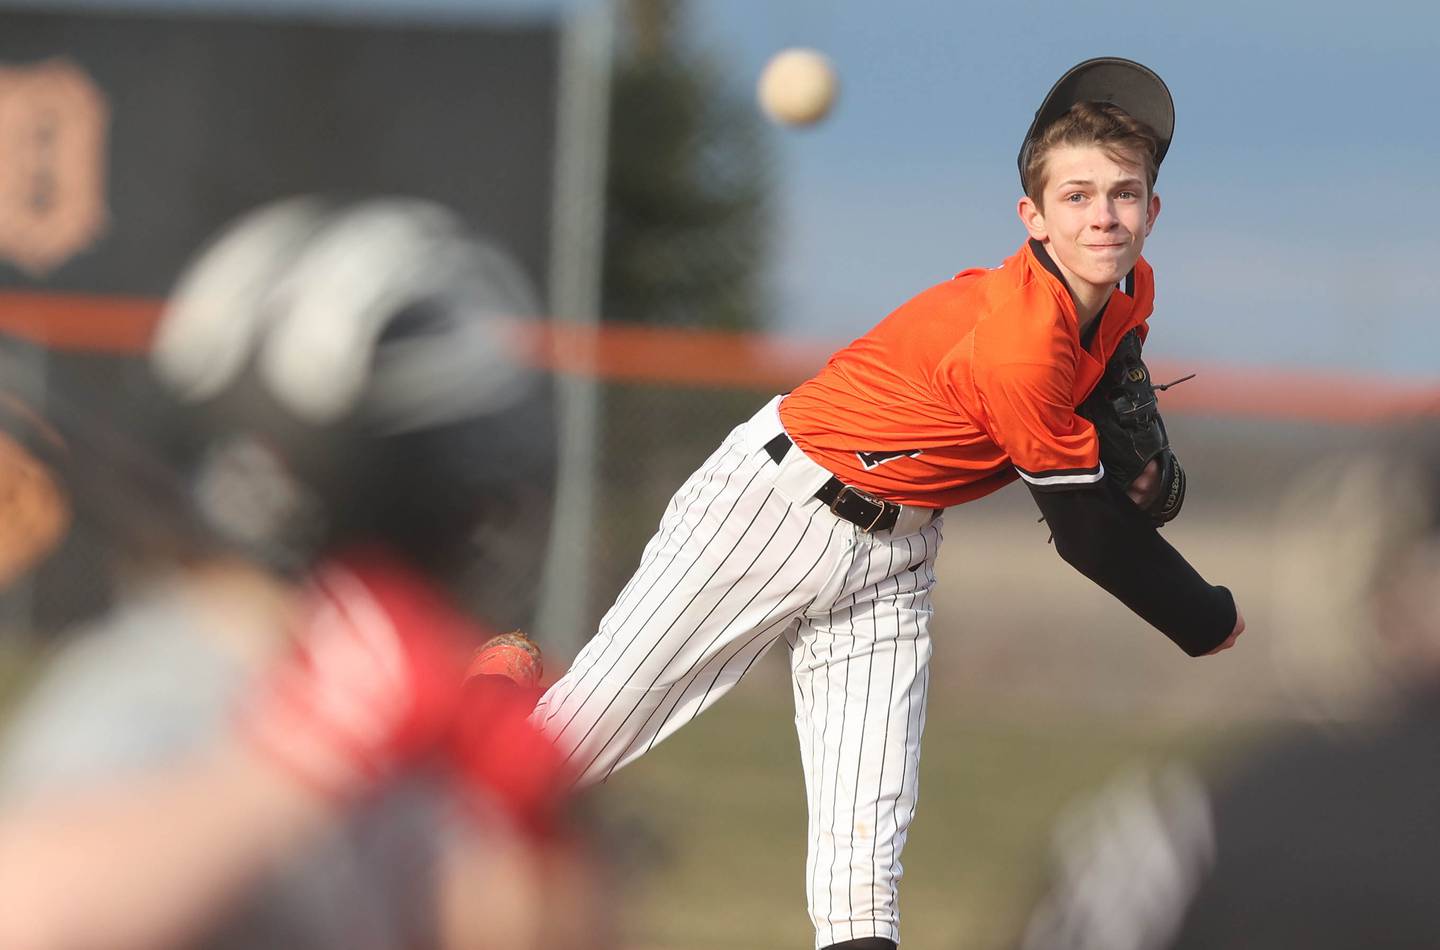 DeKalb's Jackson Kees loses his hat due to the wind as he delivers a pitch during their game against Jefferson Wednesday, April 6, 2022, at DeKalb High School.